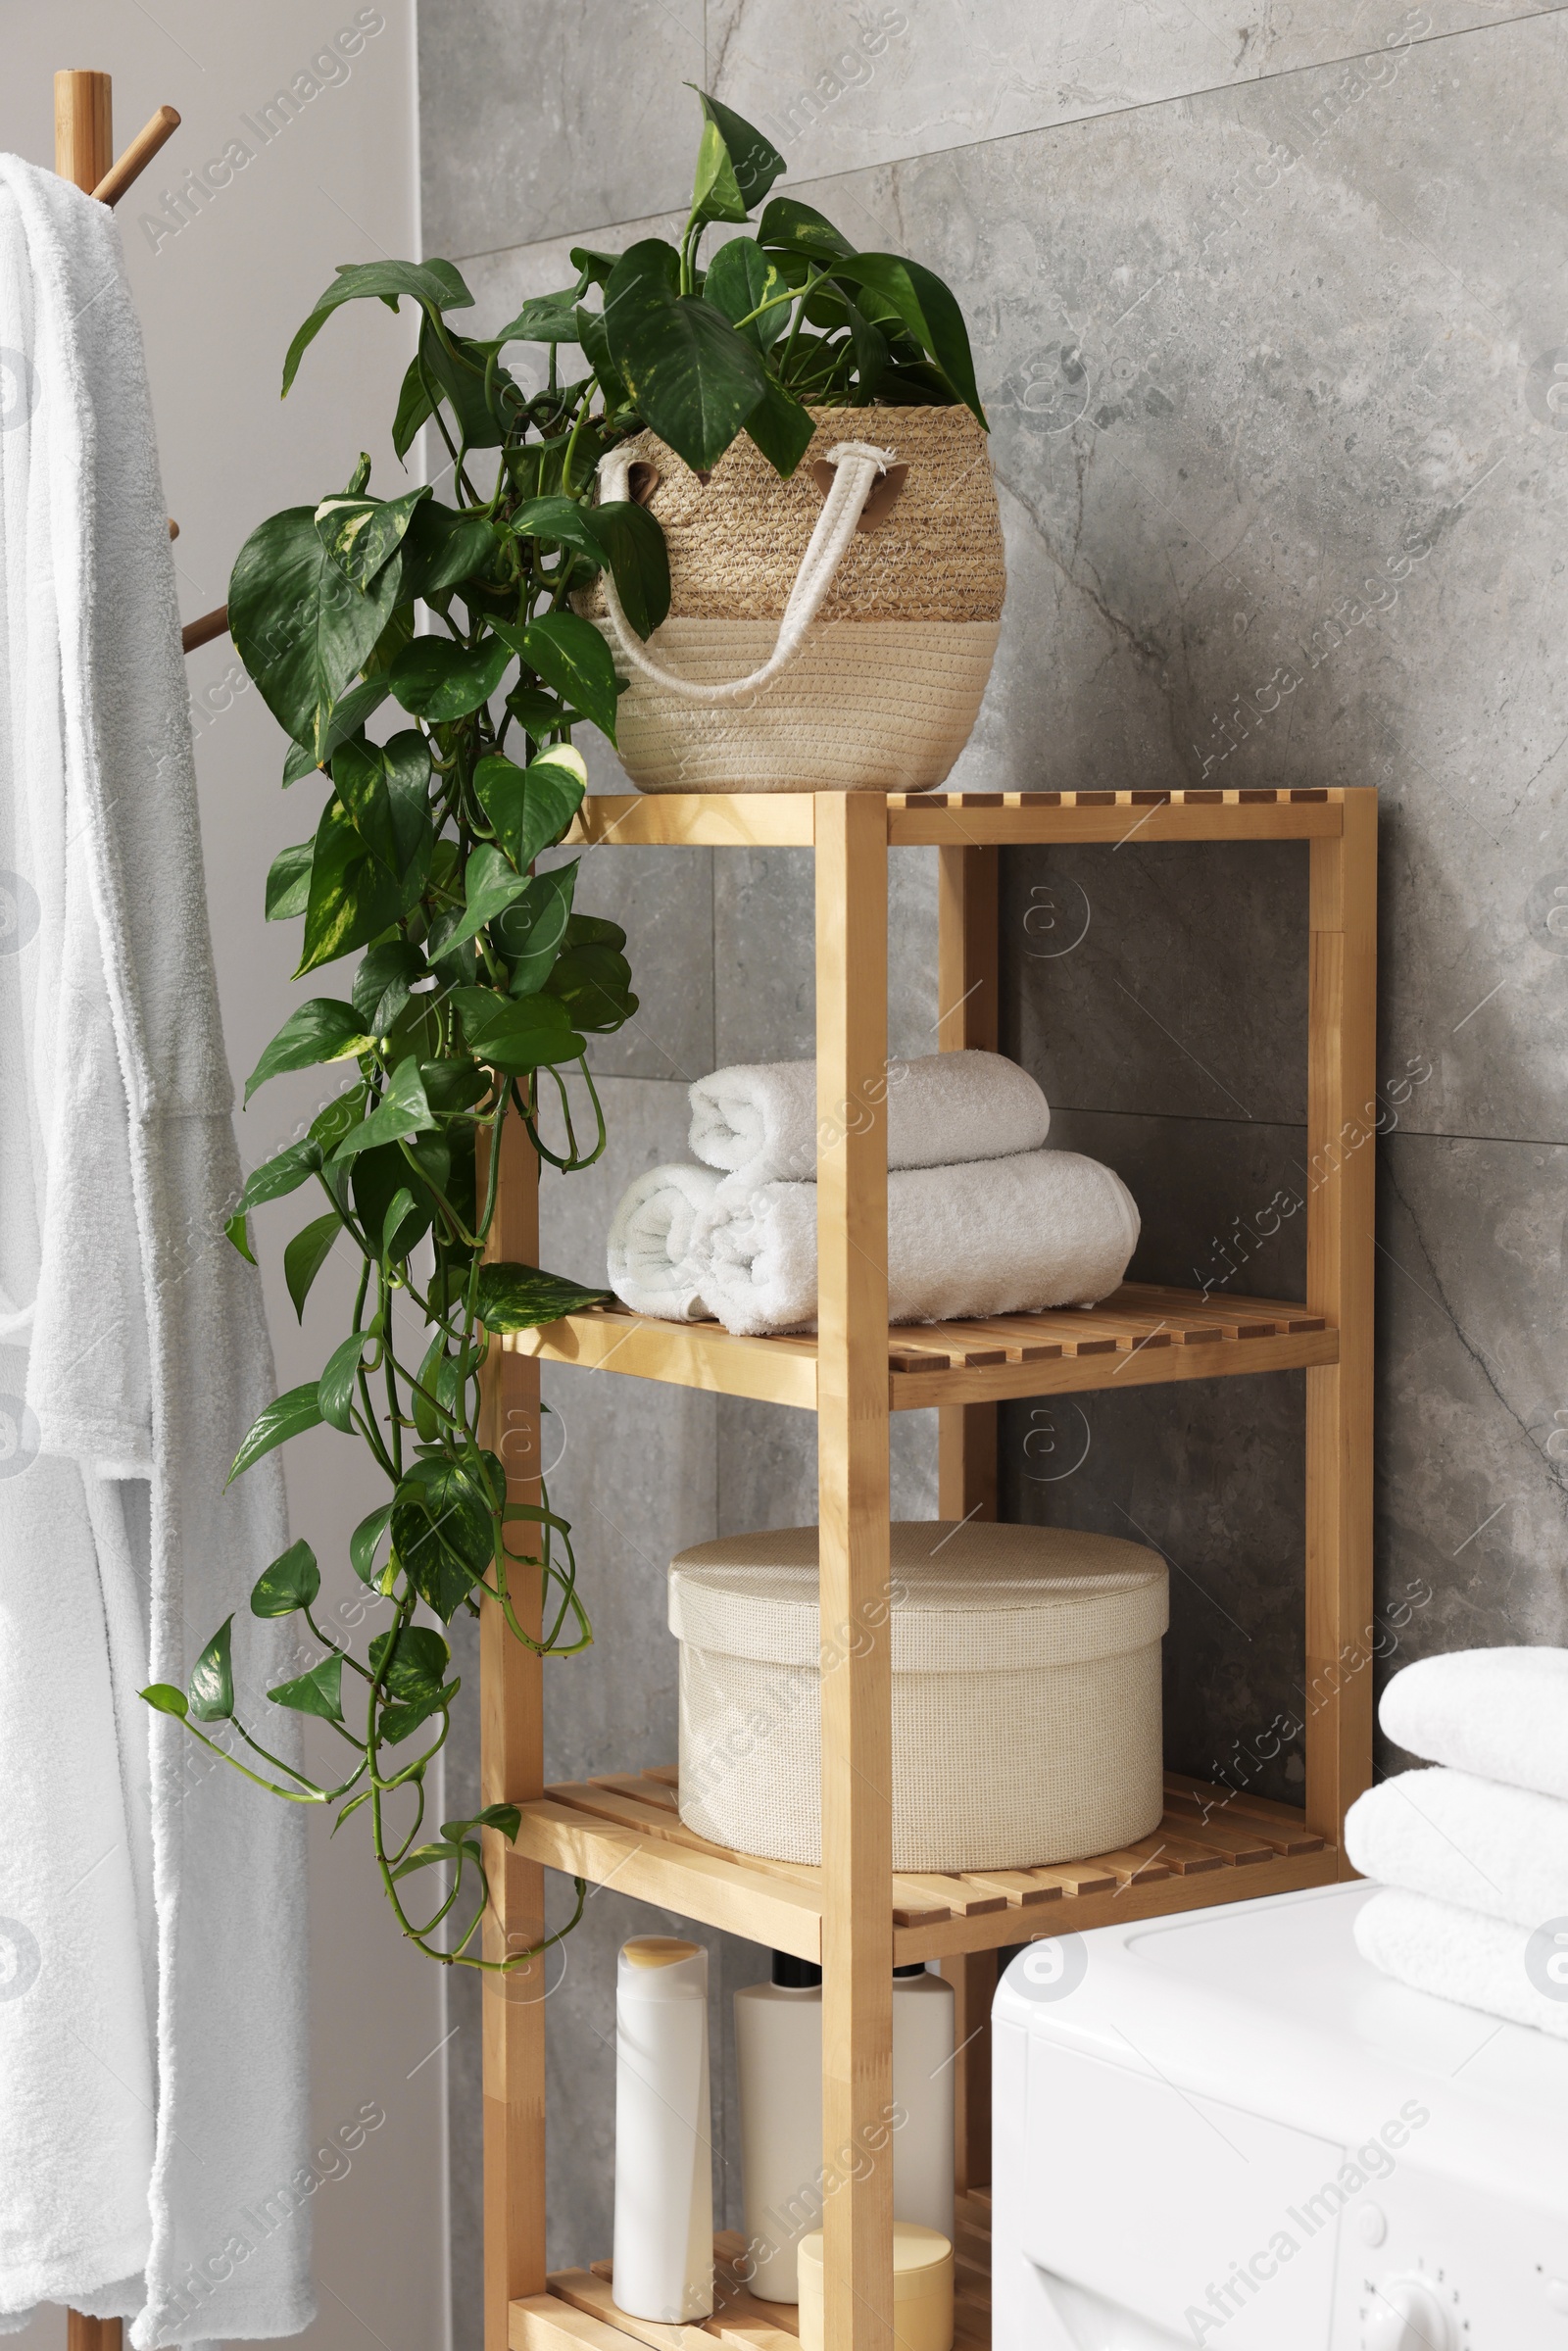 Photo of Shelving unit with rolled towels, houseplant, box and bottles indoors